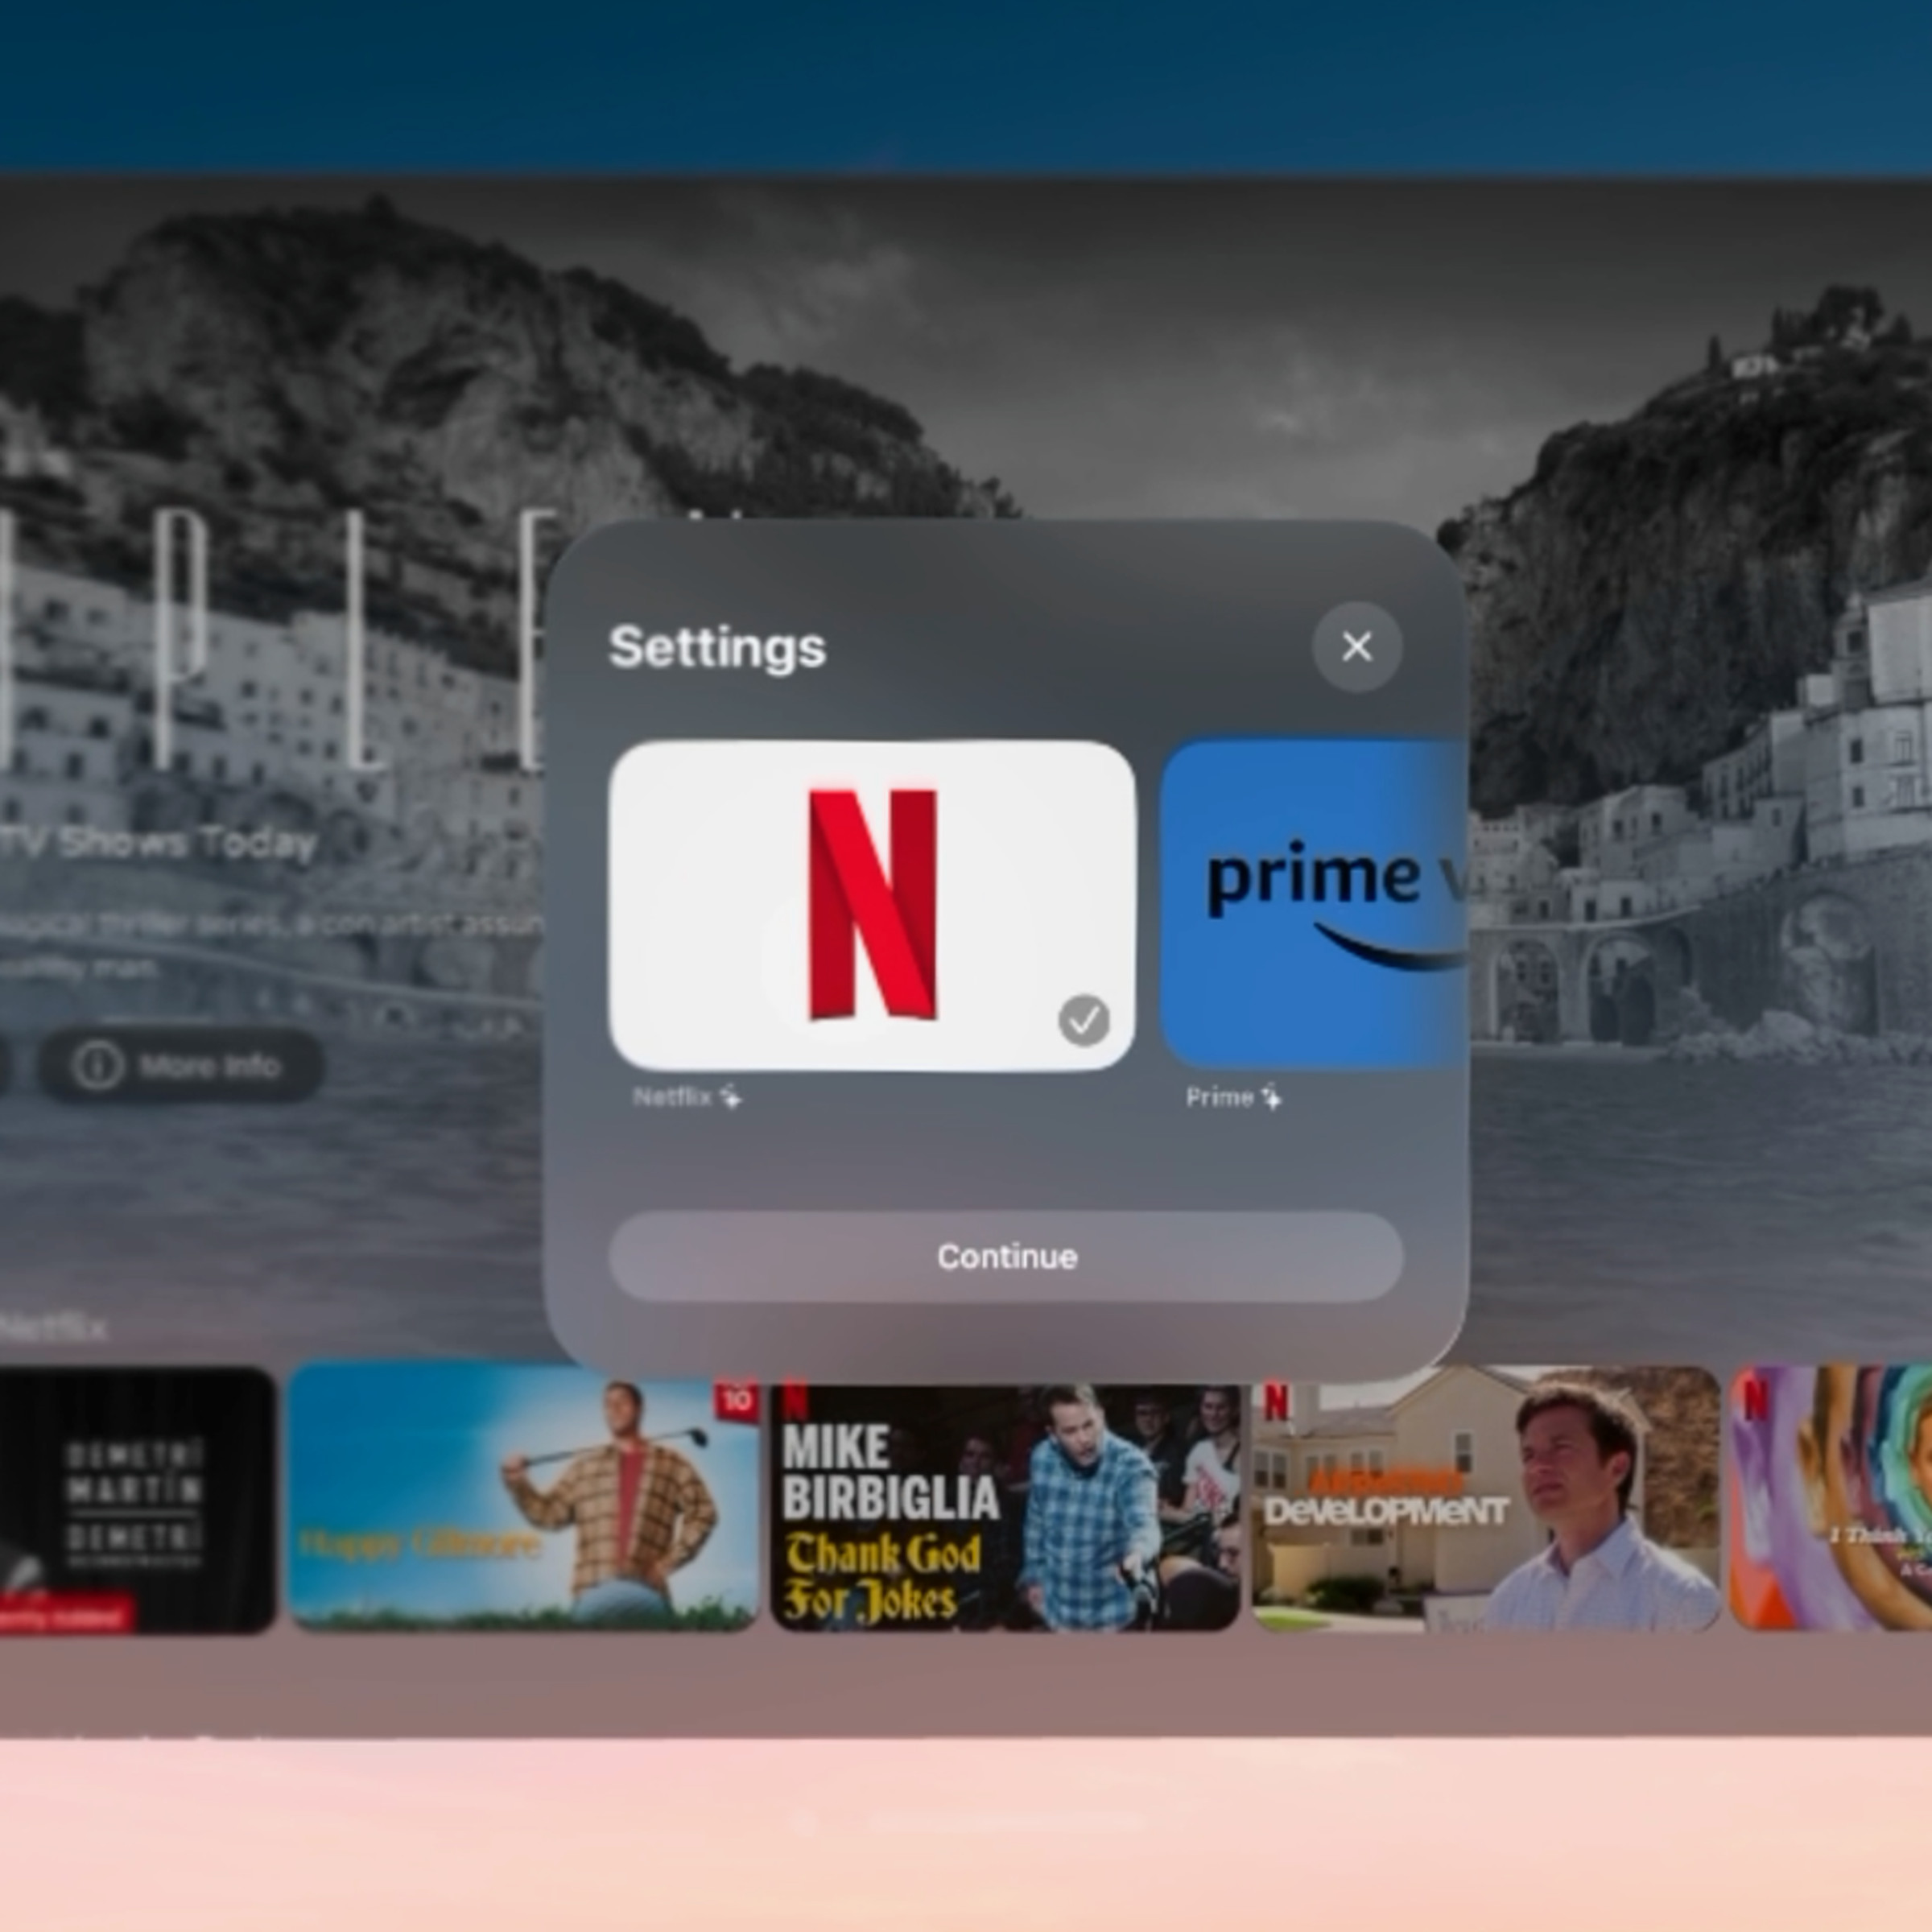 A screenshot of the Supercut app, showing the service selector with Netflix and Prime Video as options.